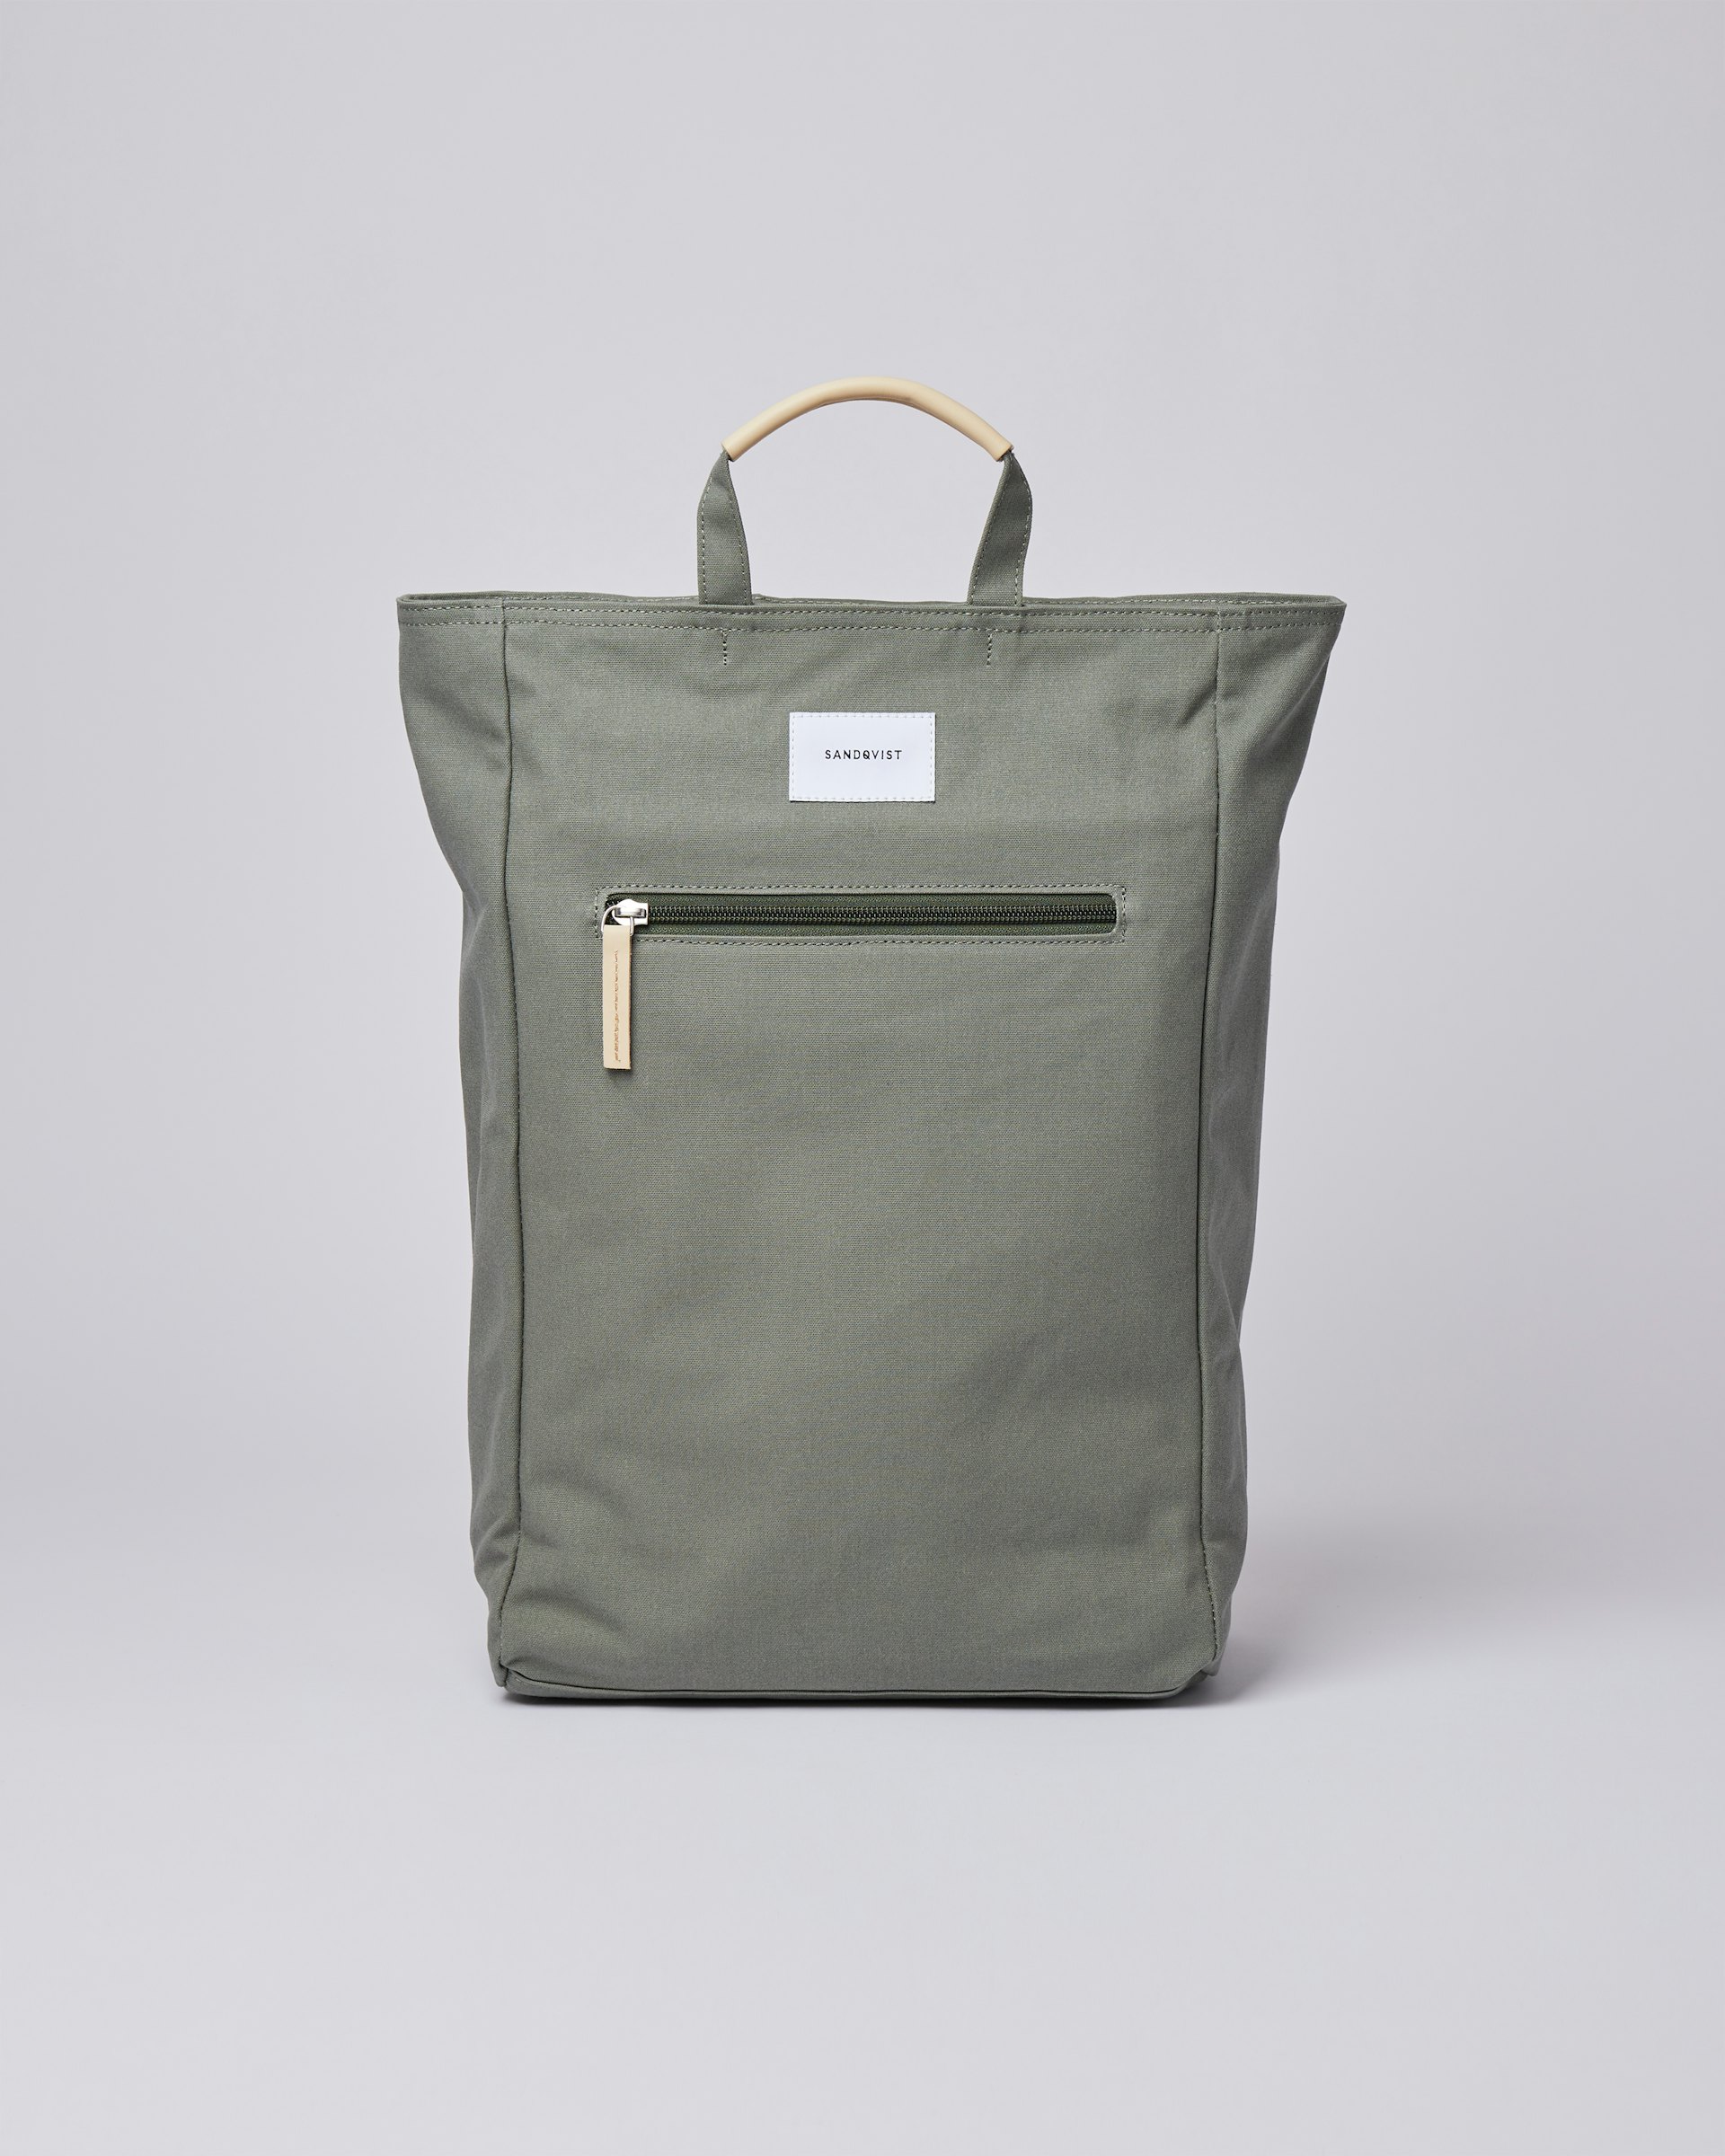 Tony belongs to the category Backpacks and is in color dusty green